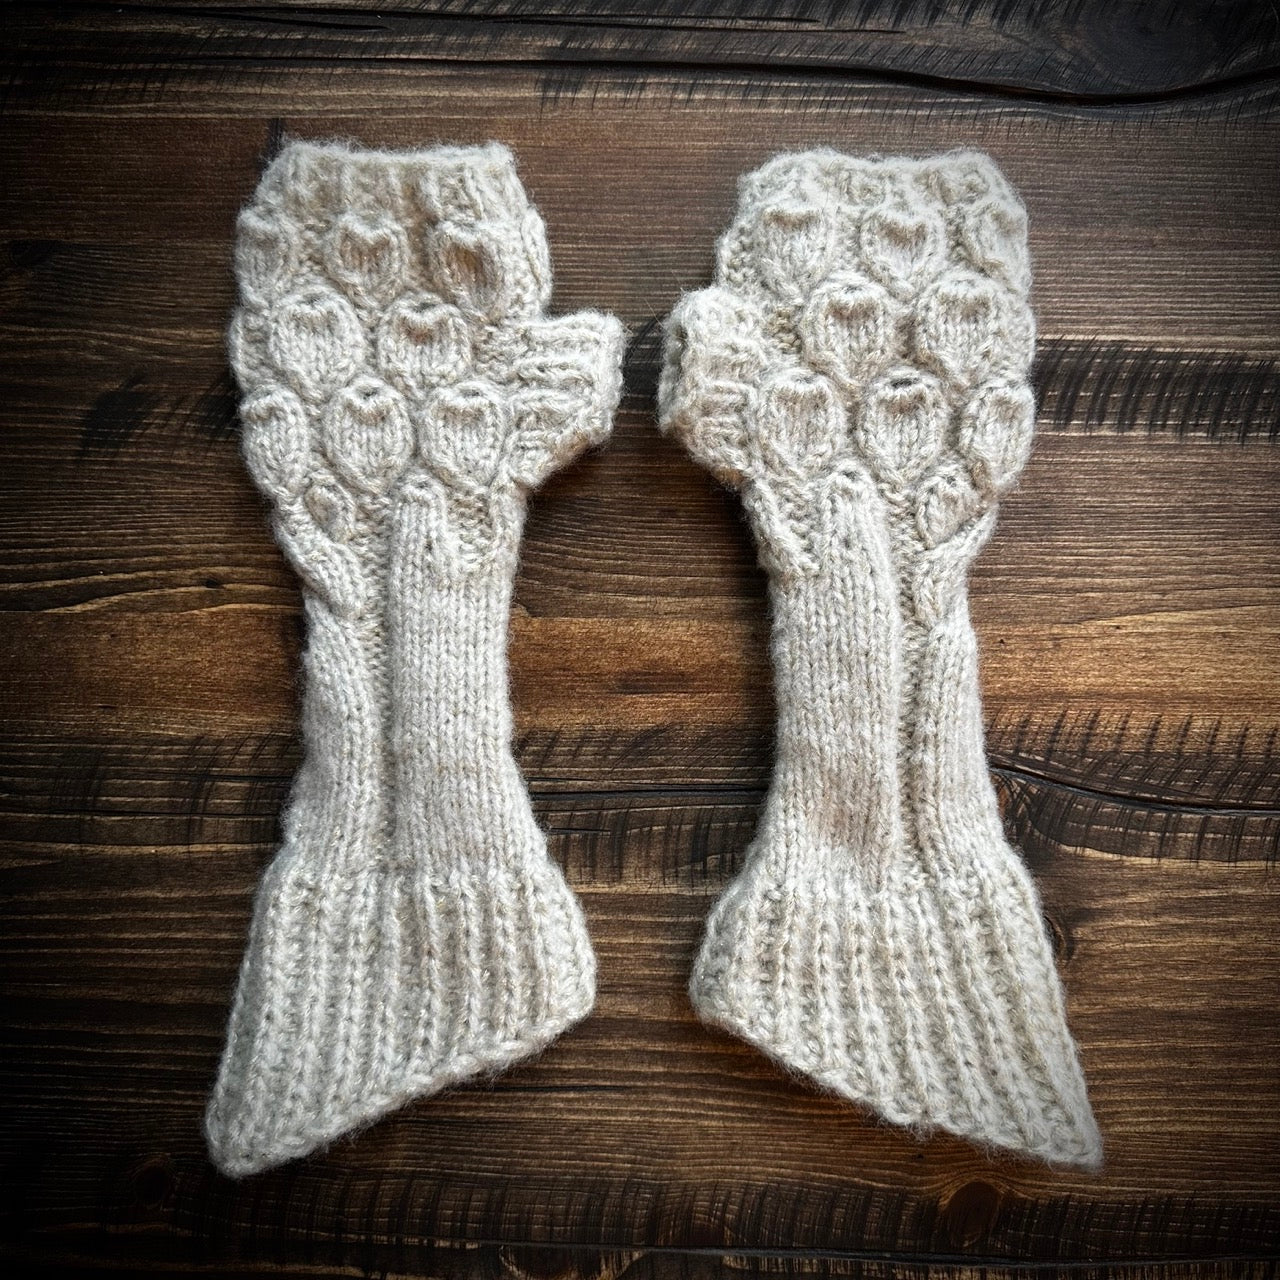 Handmade knitted sparkling ivory arm warmers